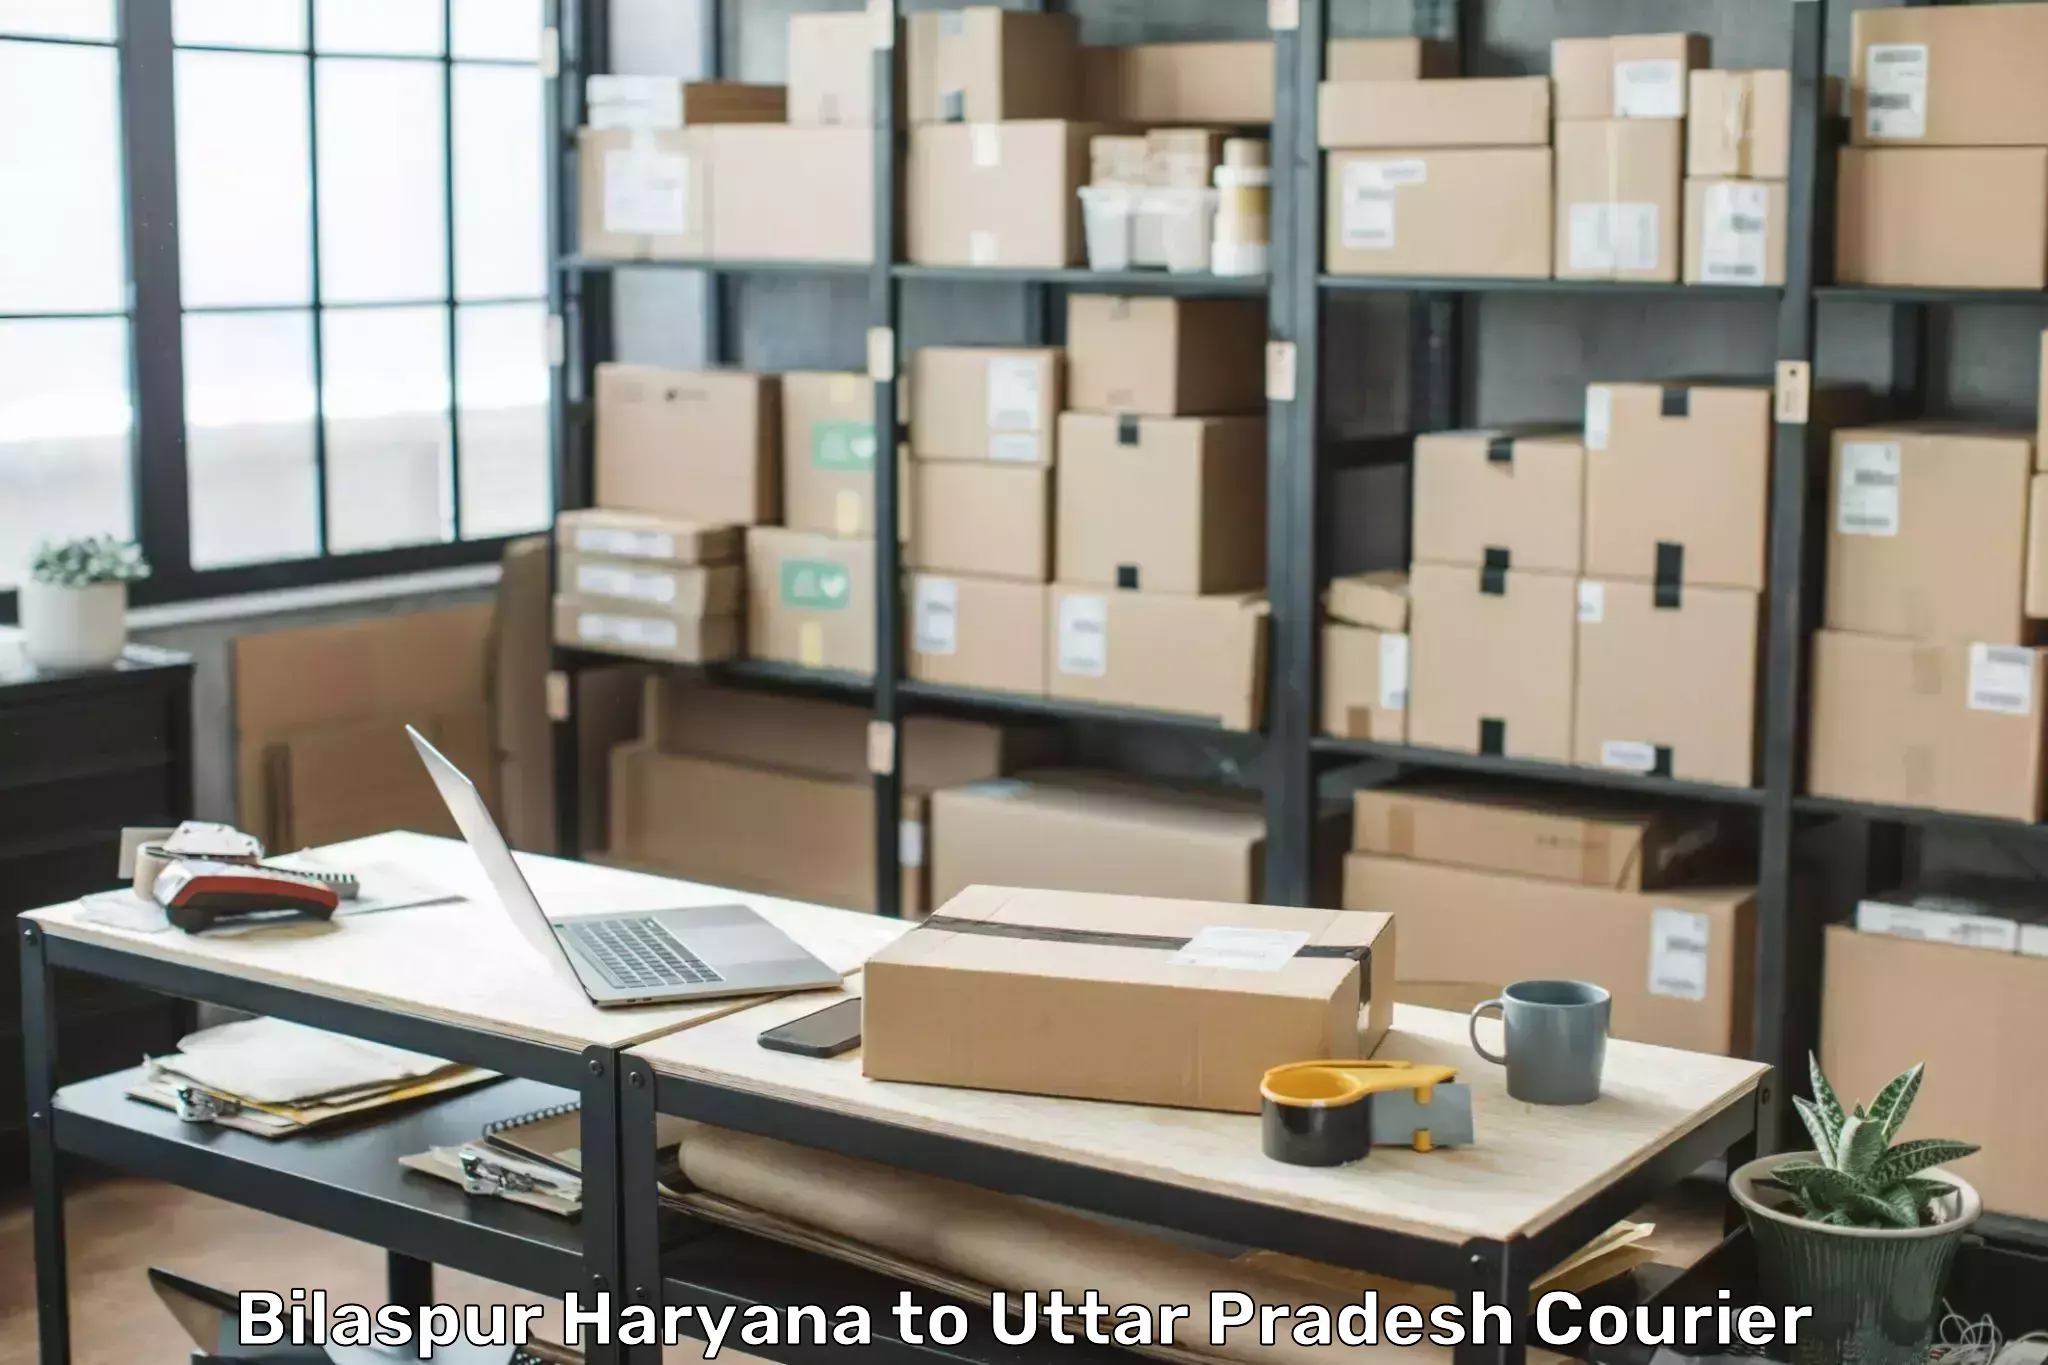 Online luggage shipping in Bilaspur Haryana to Itava